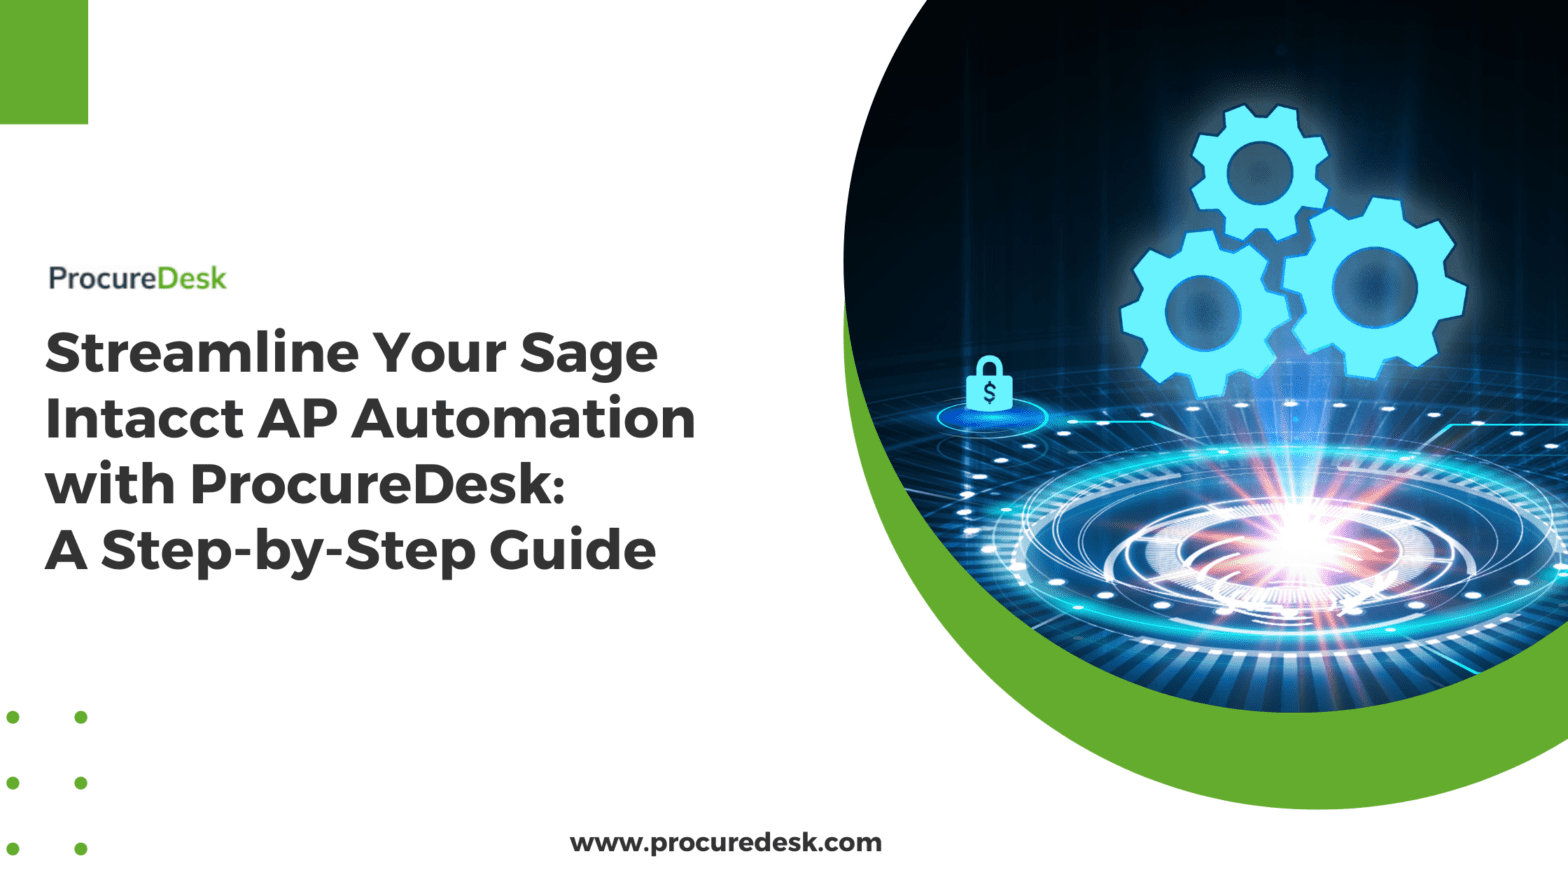 Streamline Your Sage Intacct AP Automation with ProcureDesk: A Step-by-Step Guide